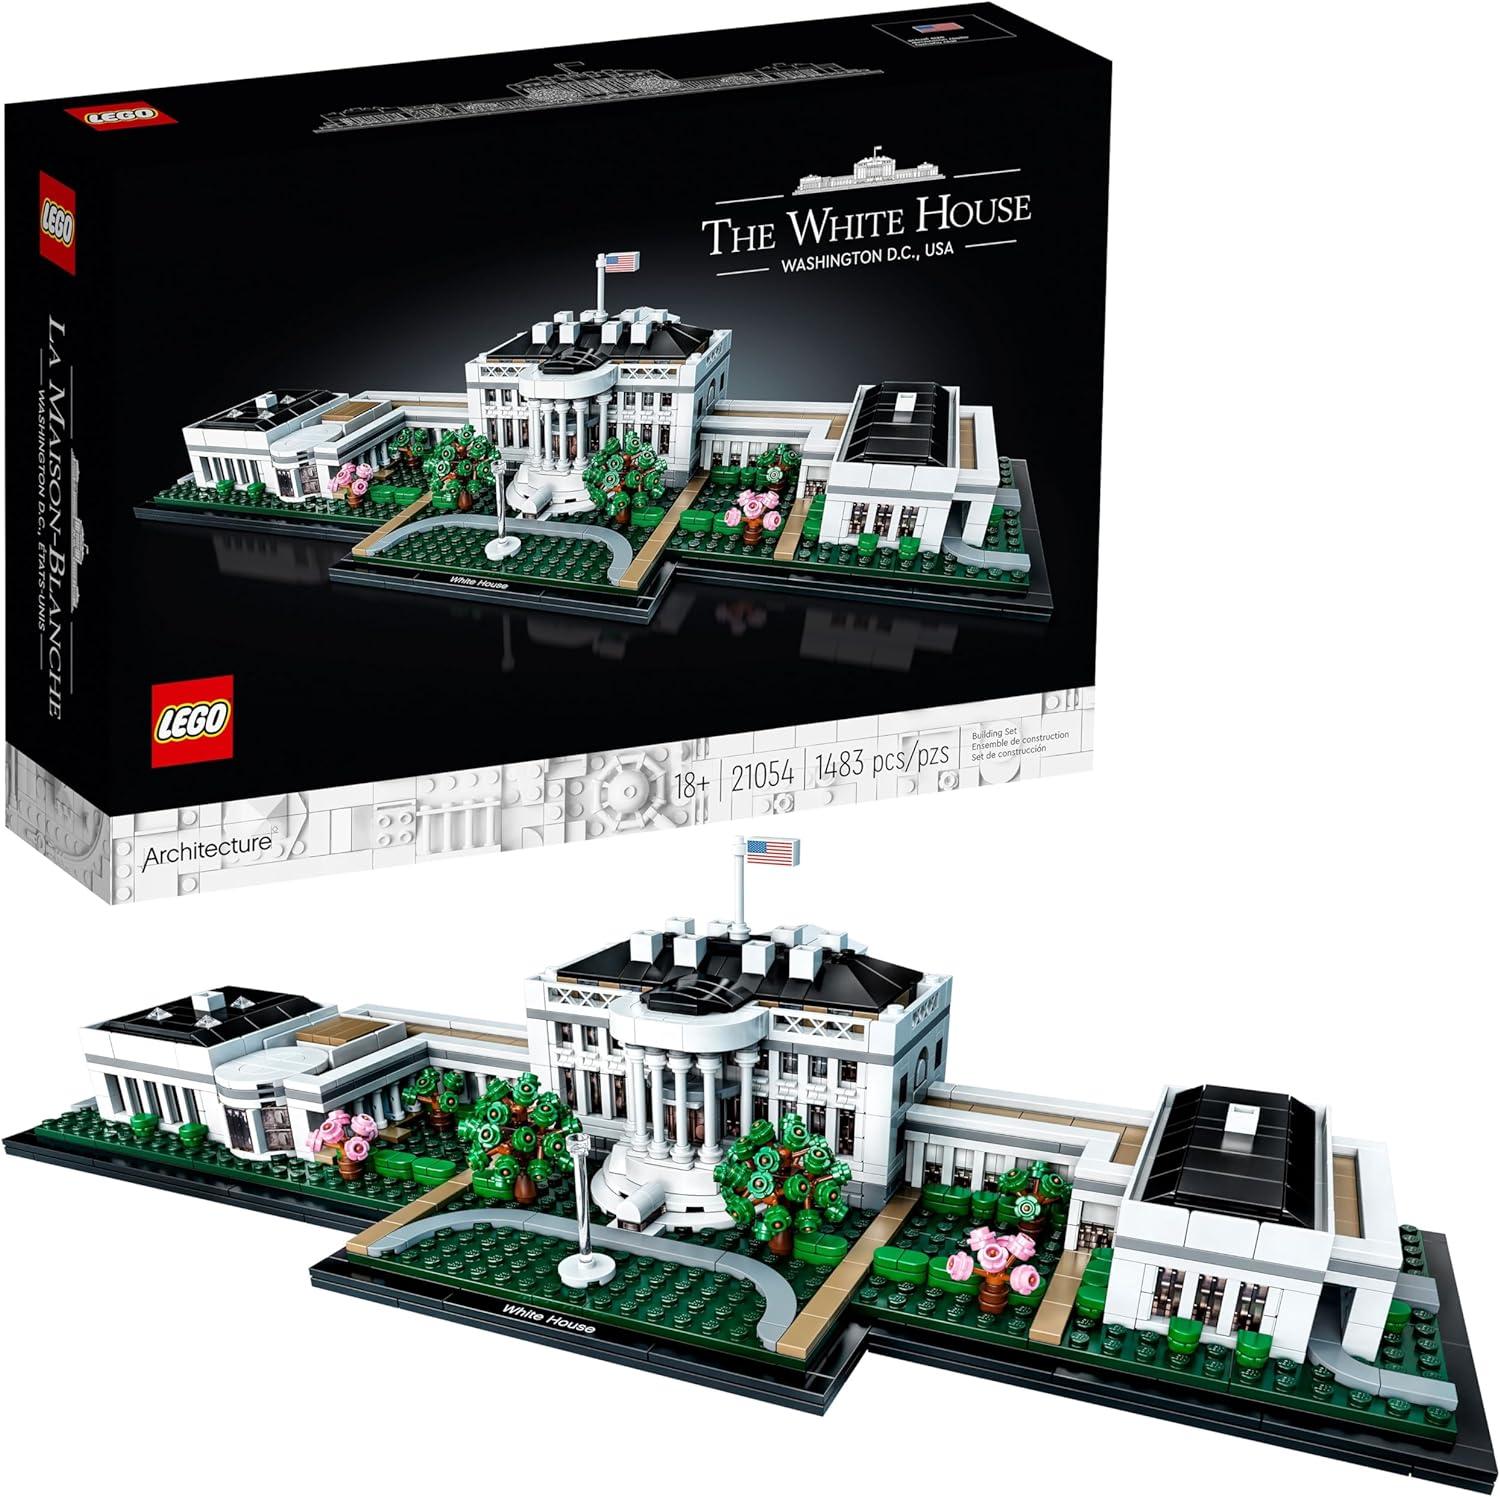 Lego Architecture Collection The White House 21054 for $58.99 Shipped